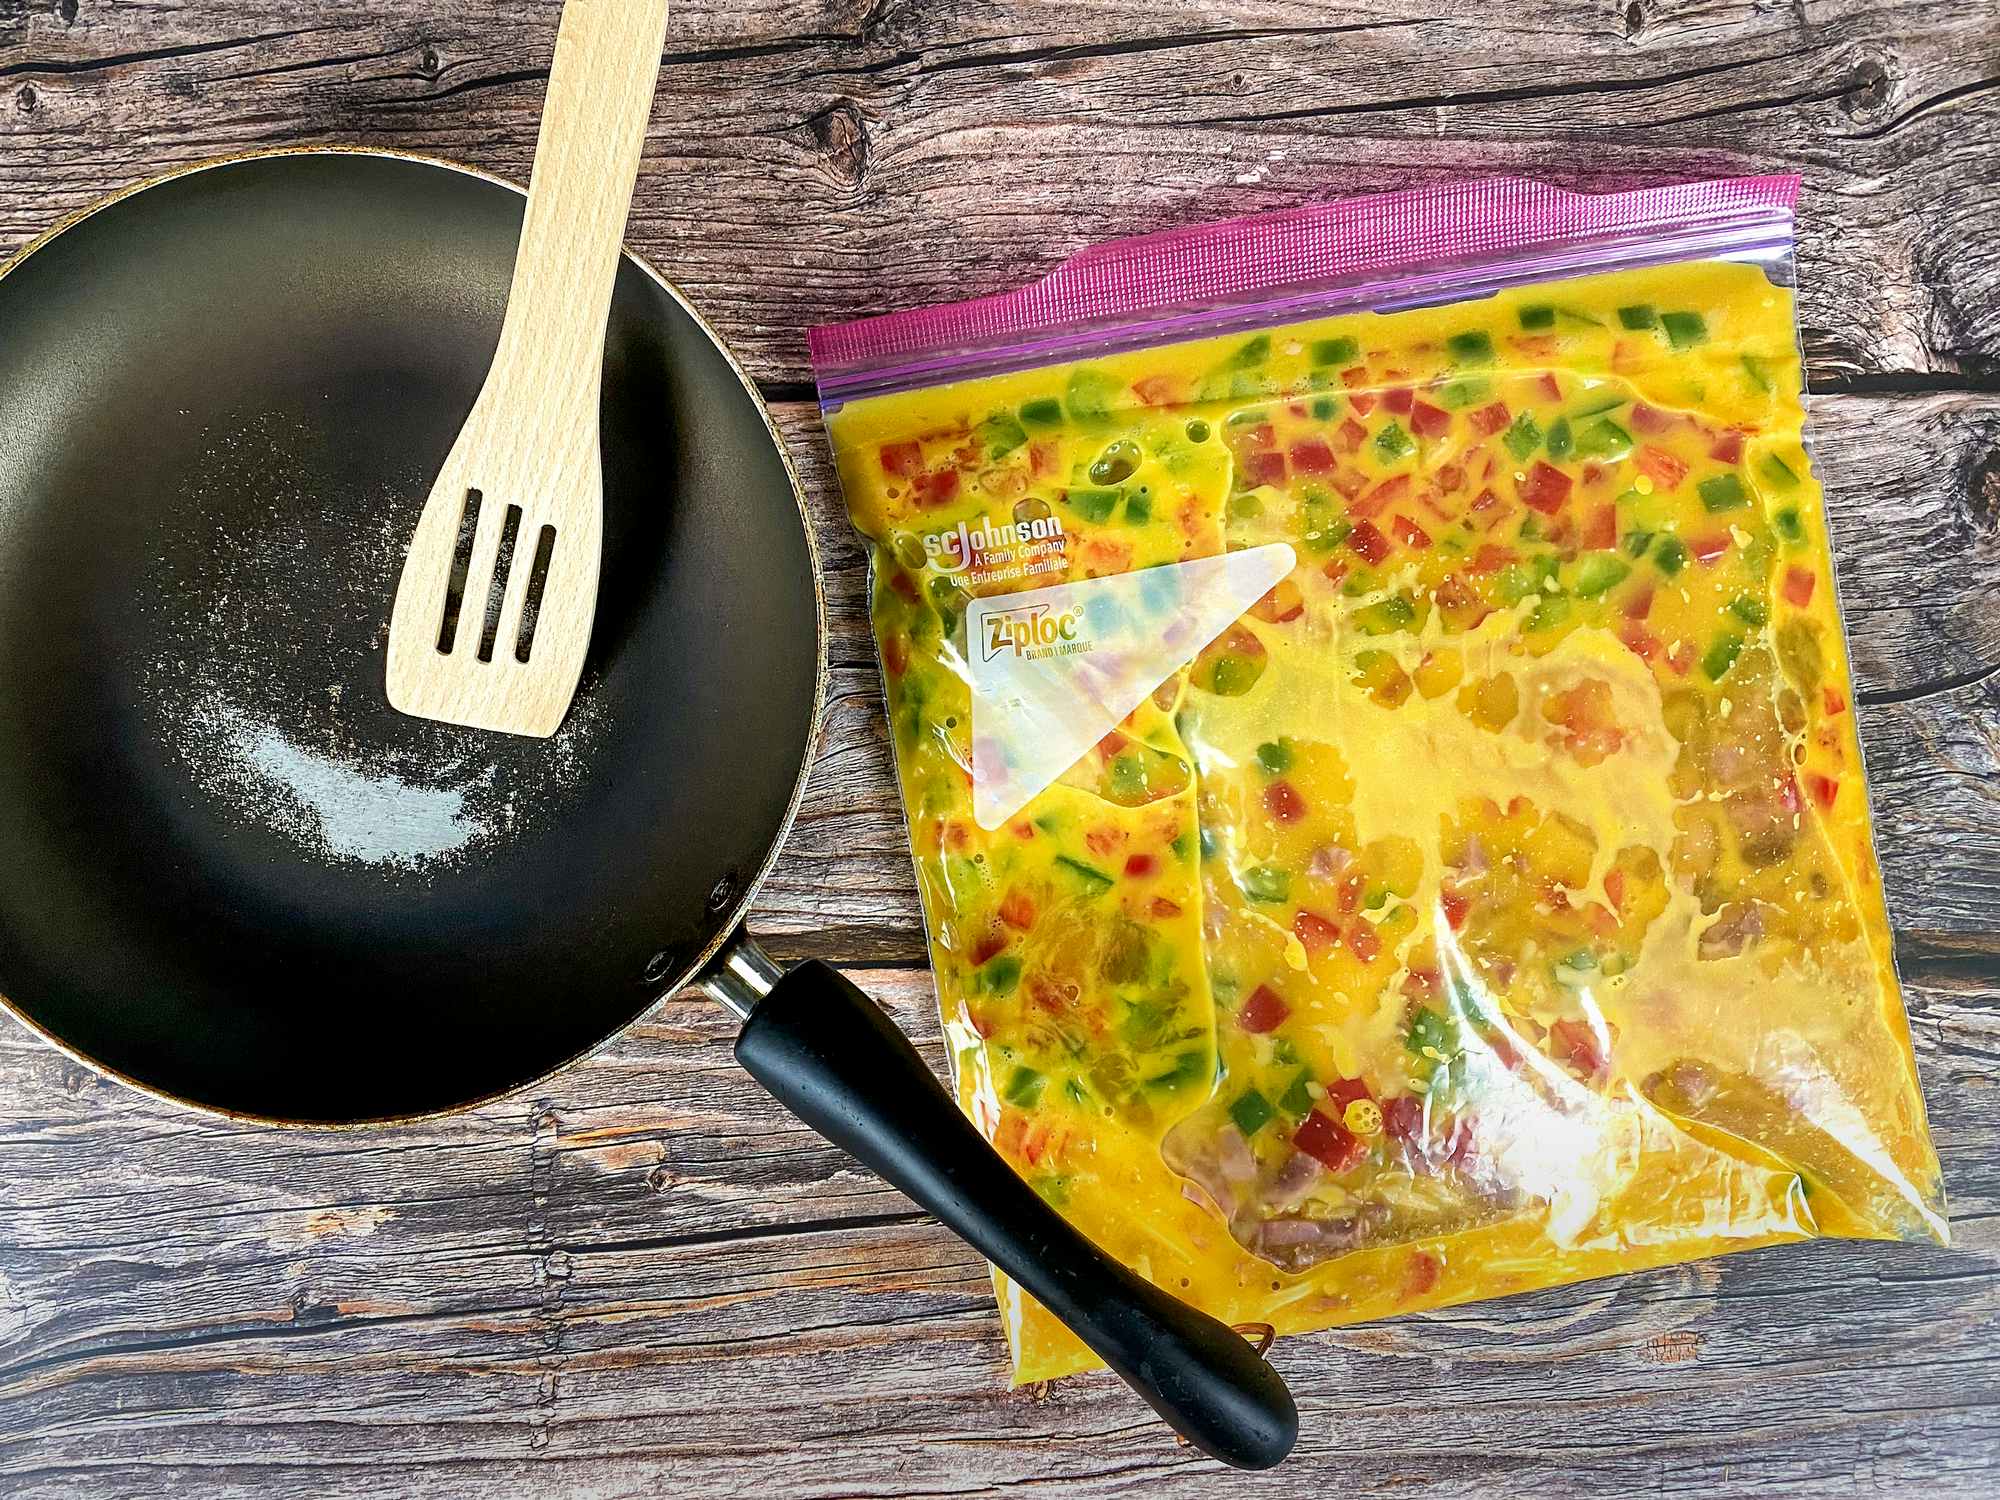 bag of eggs and omelet, pan, and spatula